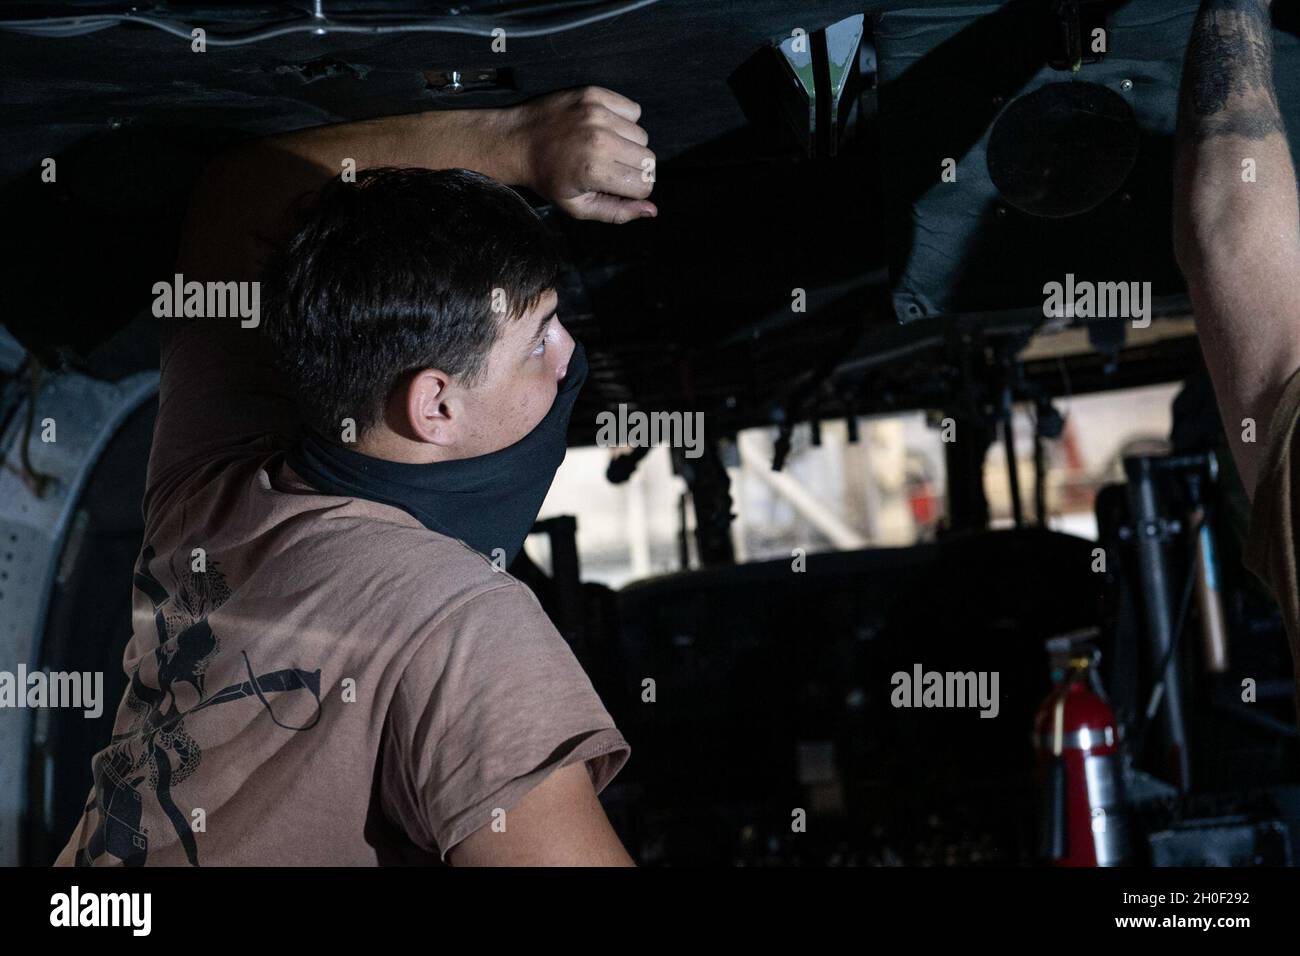 210220-N-RC007-1002 RODMAN, PANAMA (Feb. 20, 2021) Aviation Electronics Technician 2nd Class Logan Fields from Bristol, Tenn., performs maintenance on the interior of a MH-60S Seahawk helicopter assigned to the “Wildcards” of Helicopter Sea Combat Squadron (HSC) 23 aboard the Freedom-class littoral combat ship USS Freedom (LCS 1) during a planned maintenance availability (PMAV) in Rodman, Panama, Feb. 20, 2021. Freedom is deployed to the U.S. 4th Fleet area of operations to support Joint Interagency Task Force South's mission, which includes counter-illicit drug trafficking missions in the Car Stock Photo